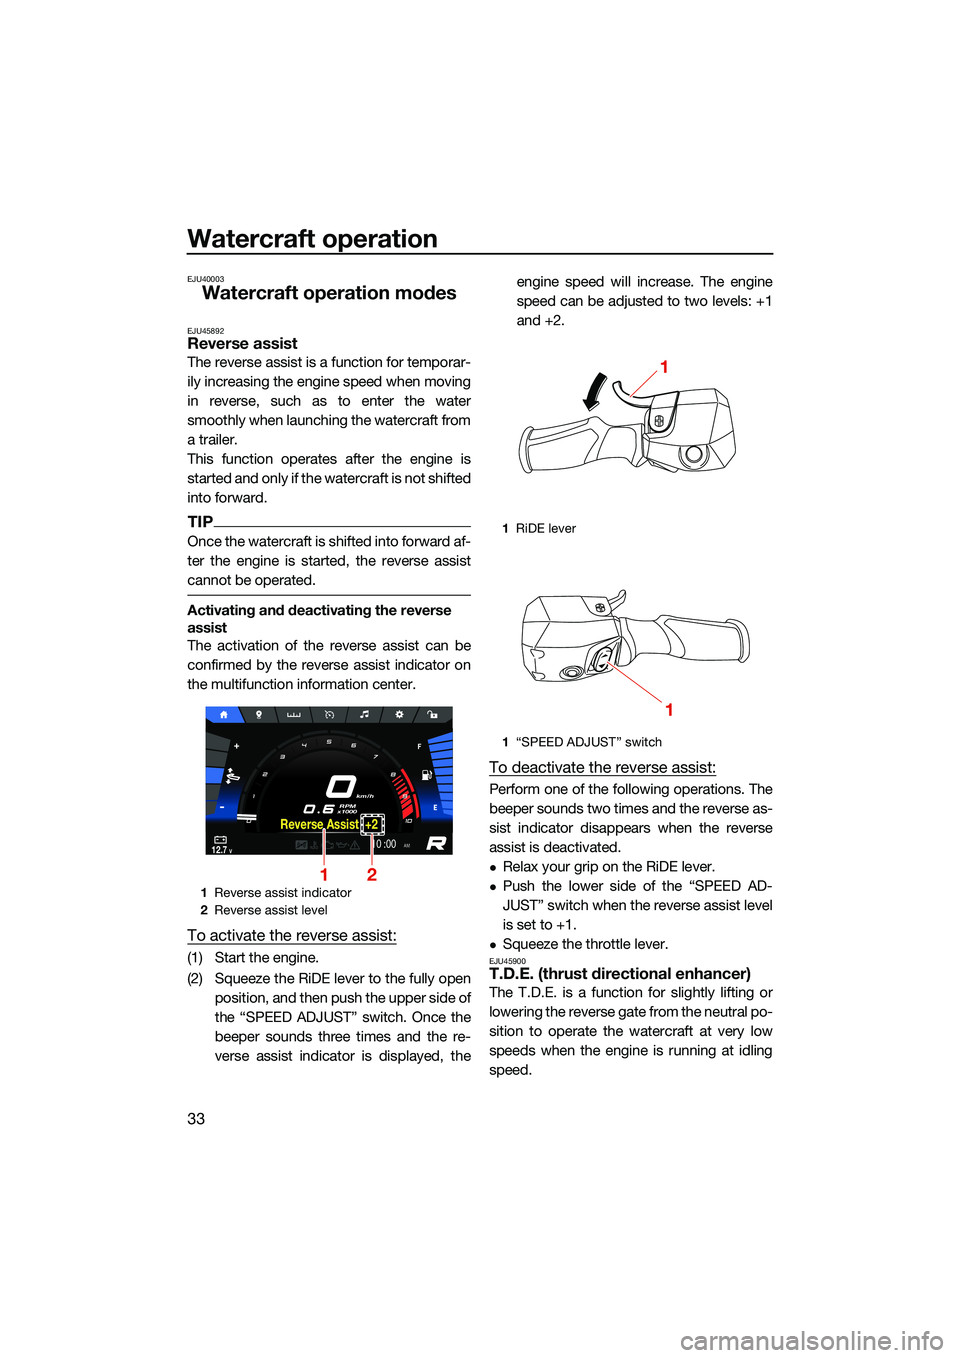 YAMAHA FX HO CRUISER 2022 Service Manual Watercraft operation
33
EJU40003
Watercraft operation modes
EJU45892Reverse assist
The reverse assist is a function for temporar-
ily increasing the engine speed when moving
in reverse, such as to ent